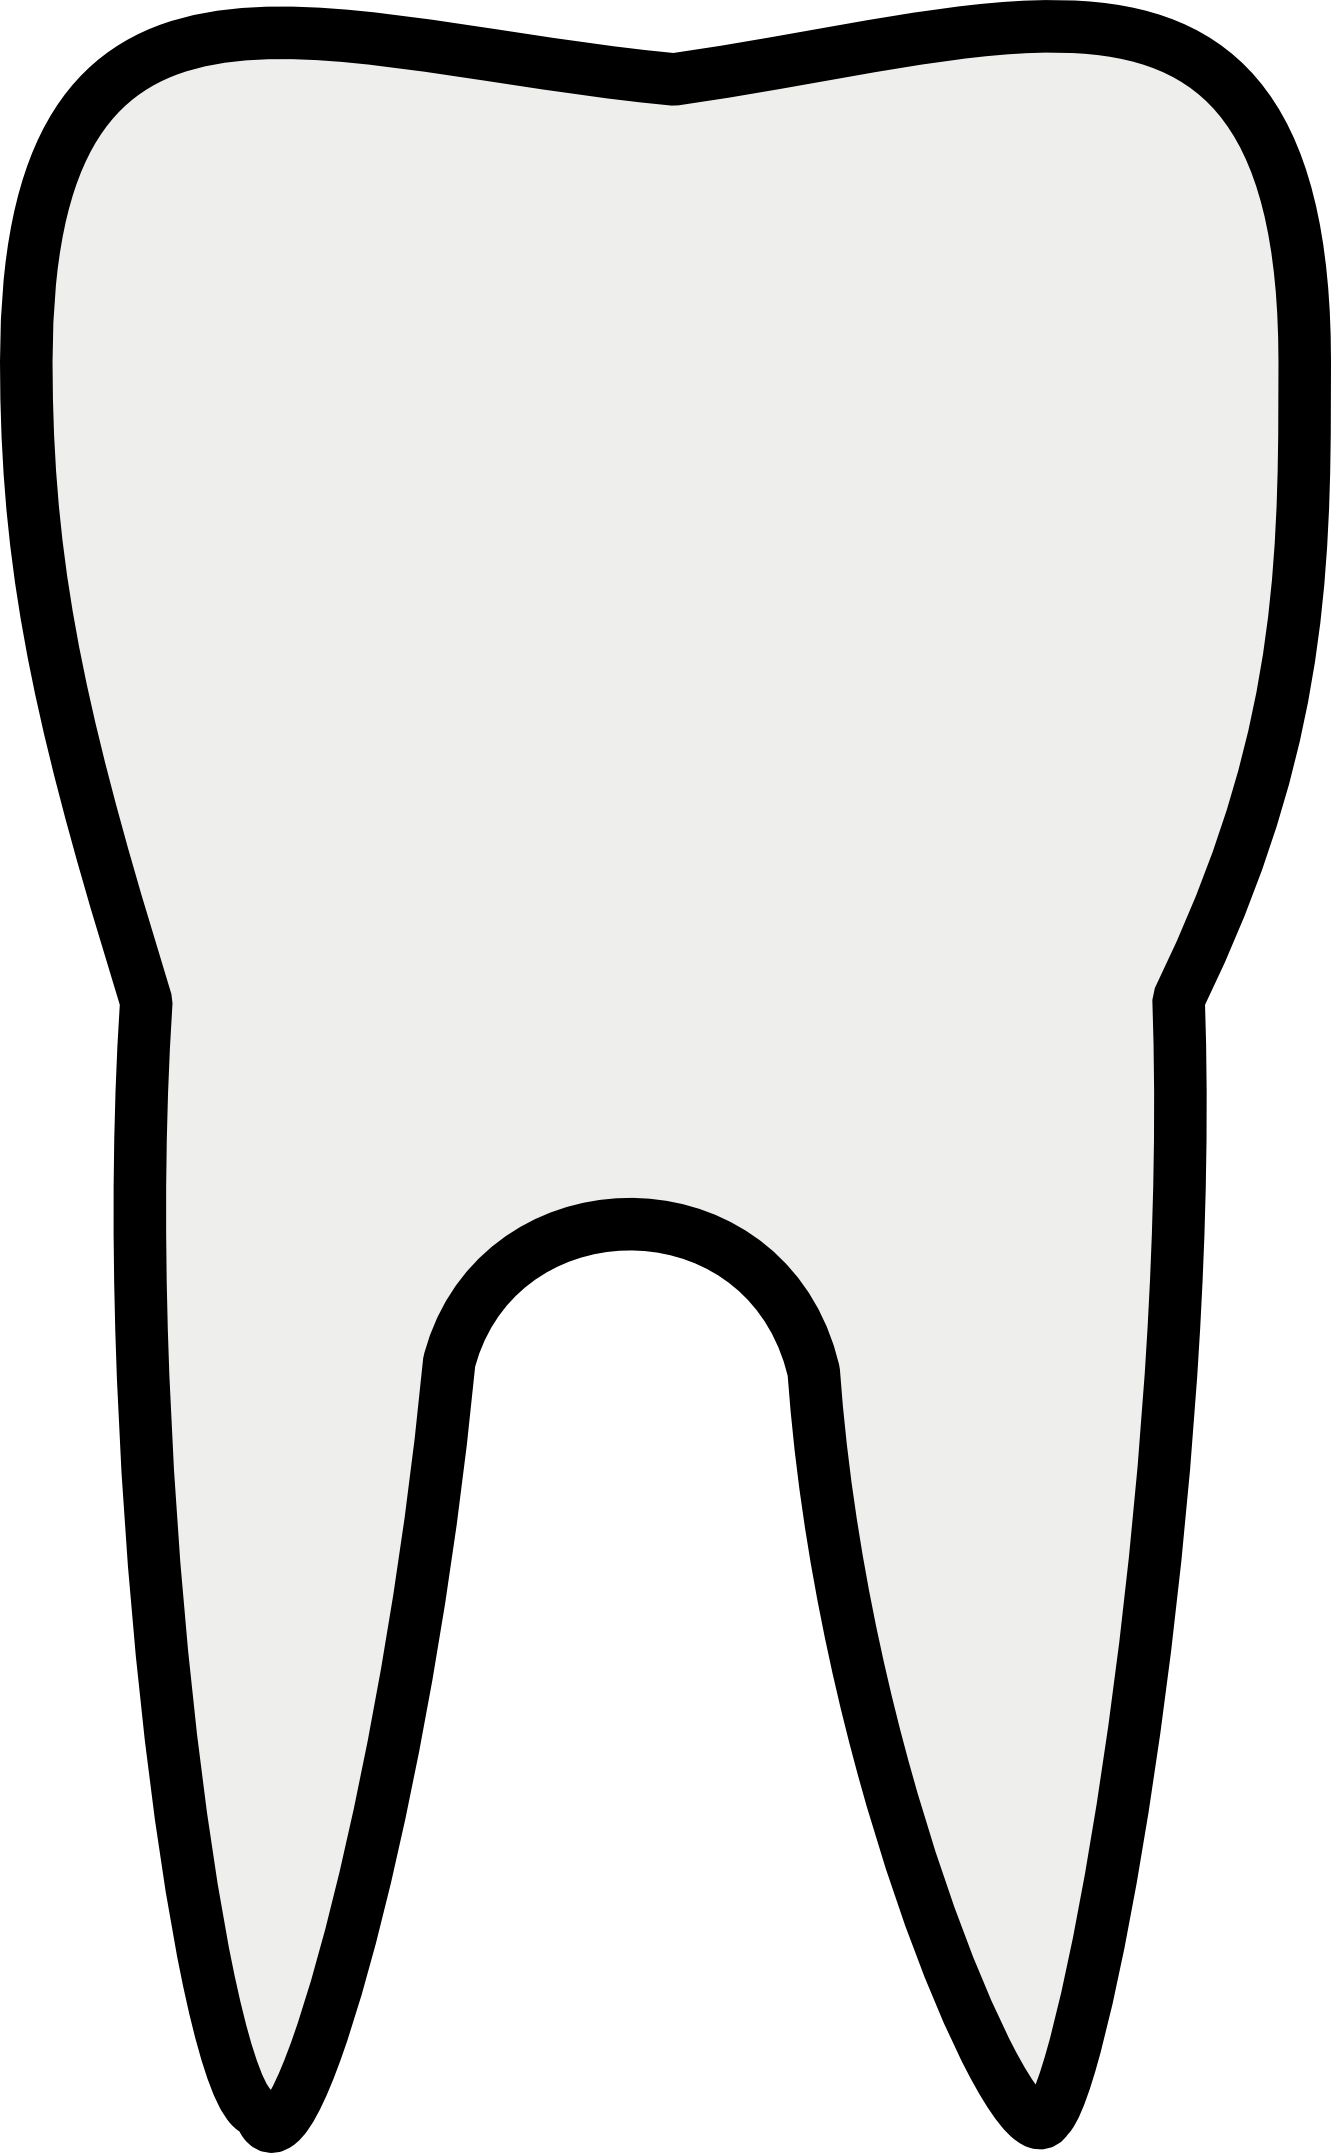 Teeth Clipart Black And White Clipart Panda Free Clipart Images